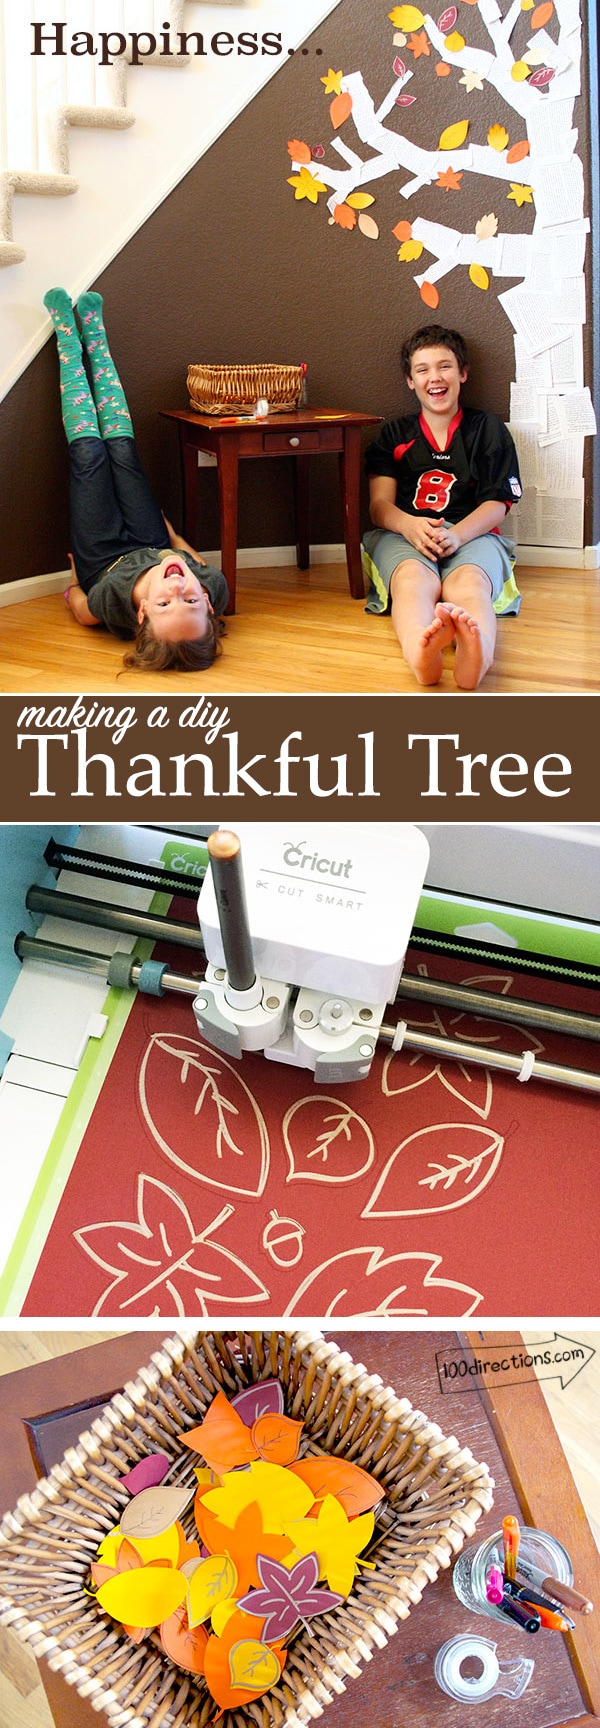 Make a DIY Thankful Tree with your Cricut - designed by Jen Goode